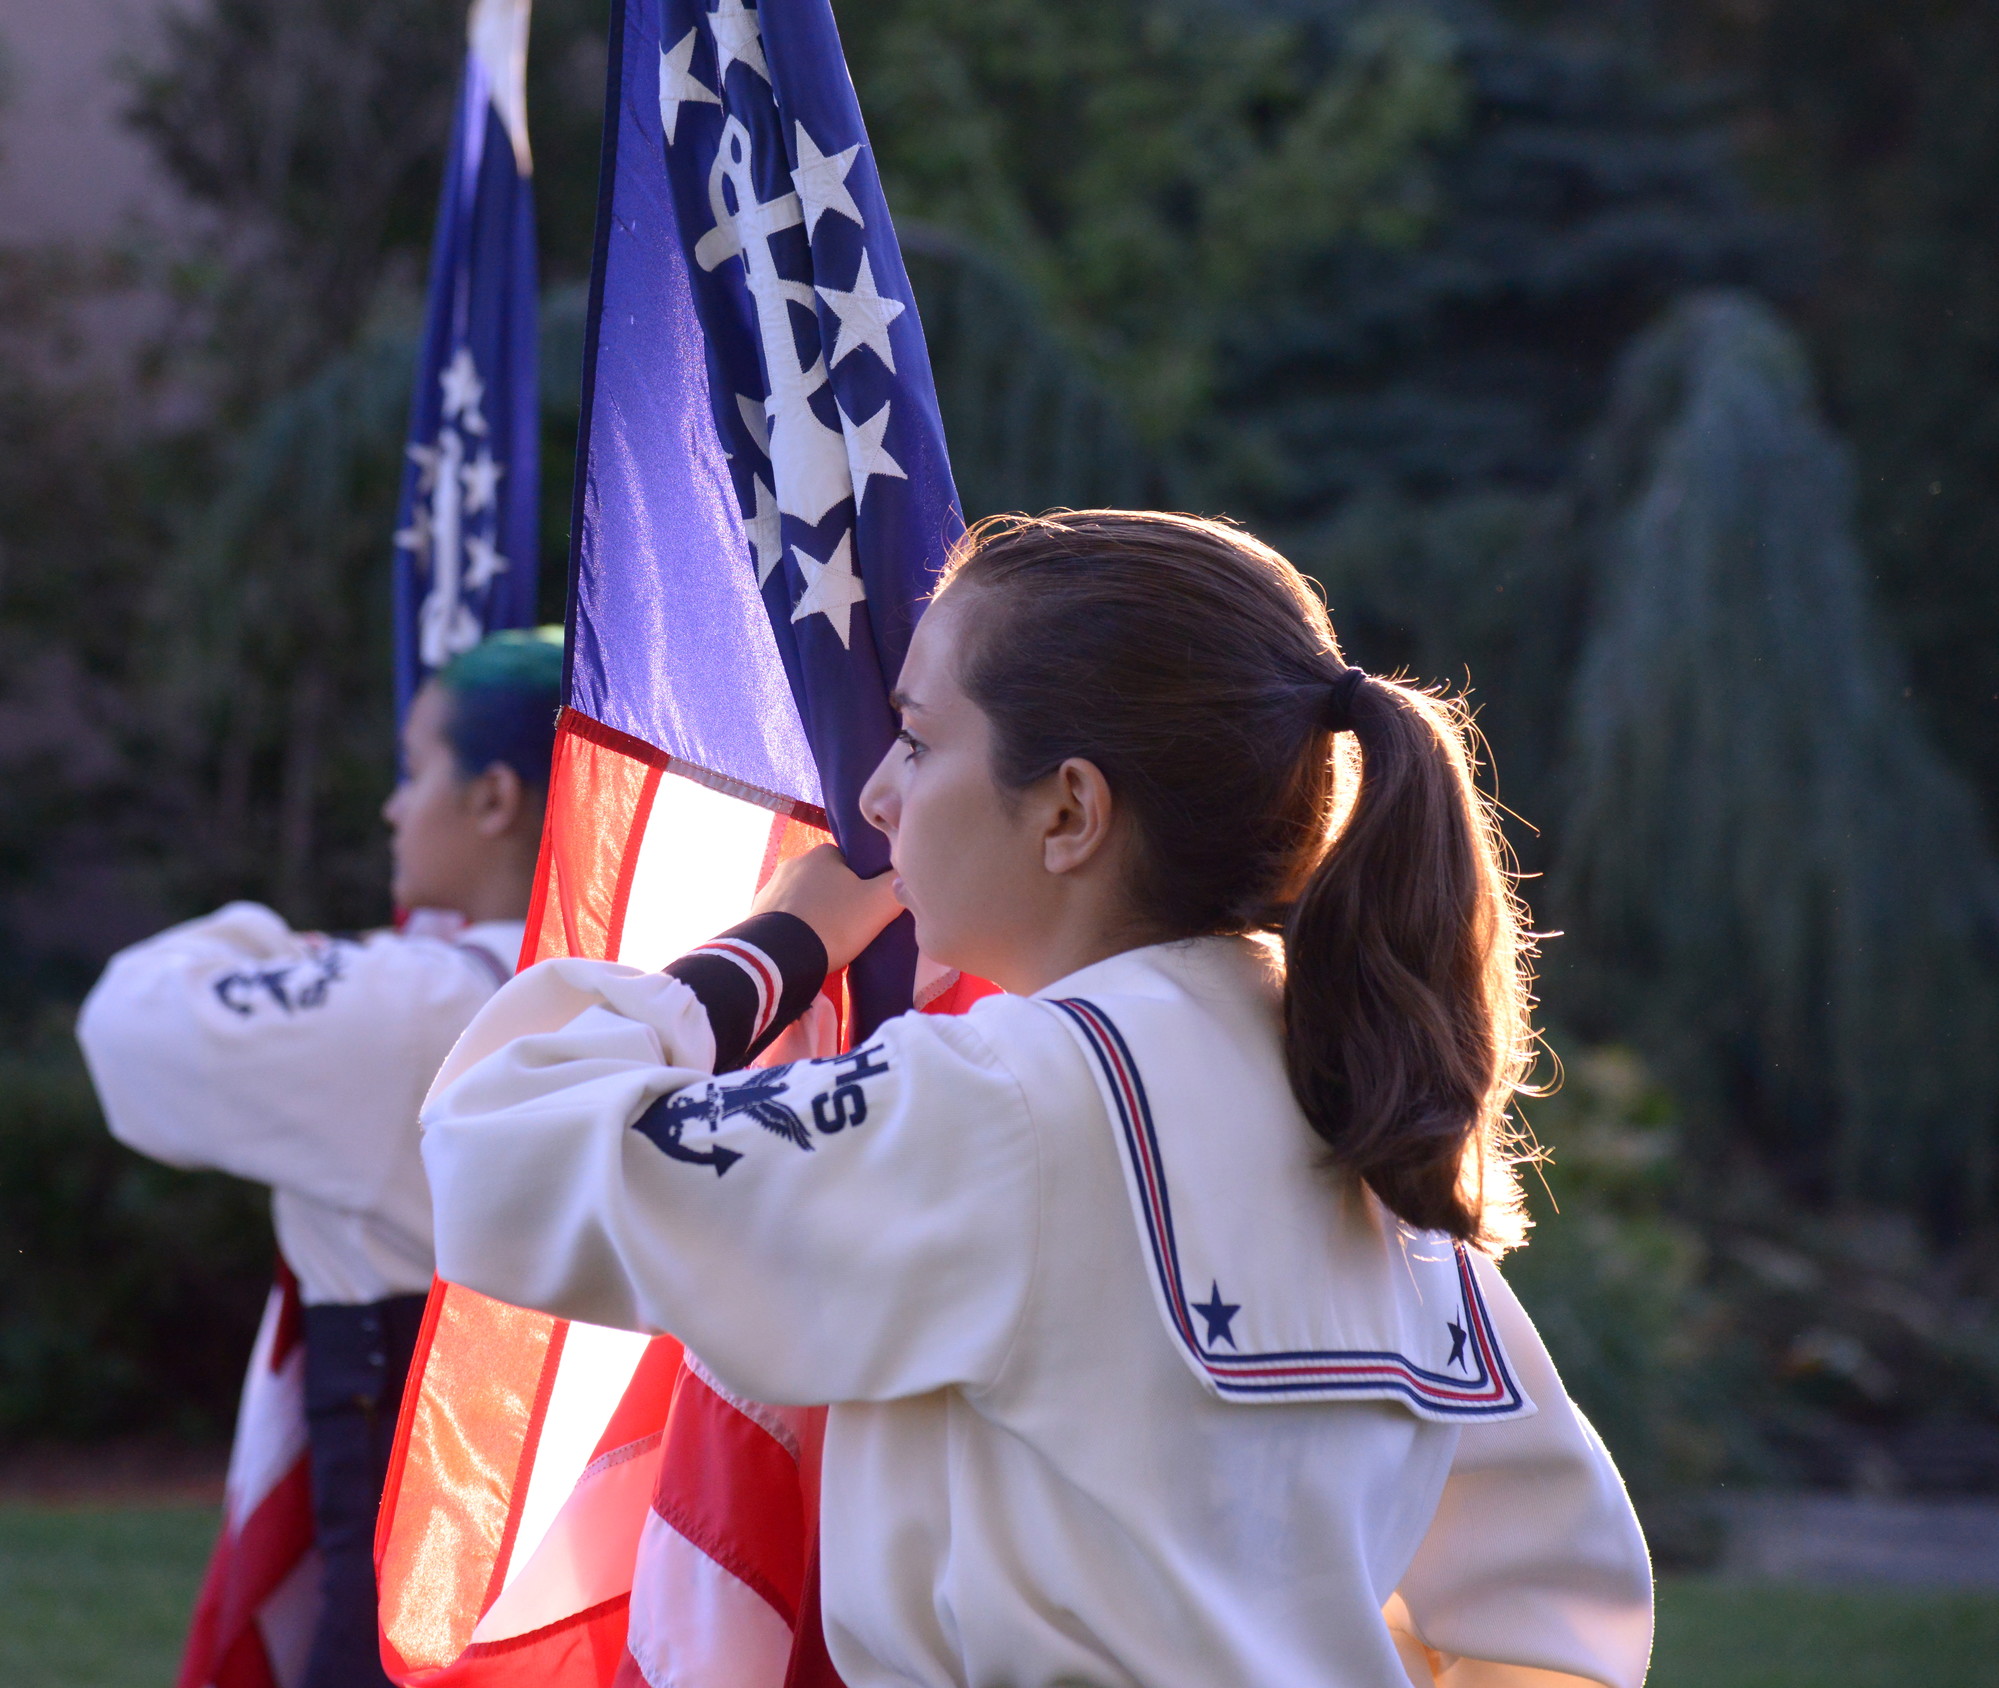 Gabriella Campielli of the marching band held her flag up high. (Penny Frondelli/Herald)